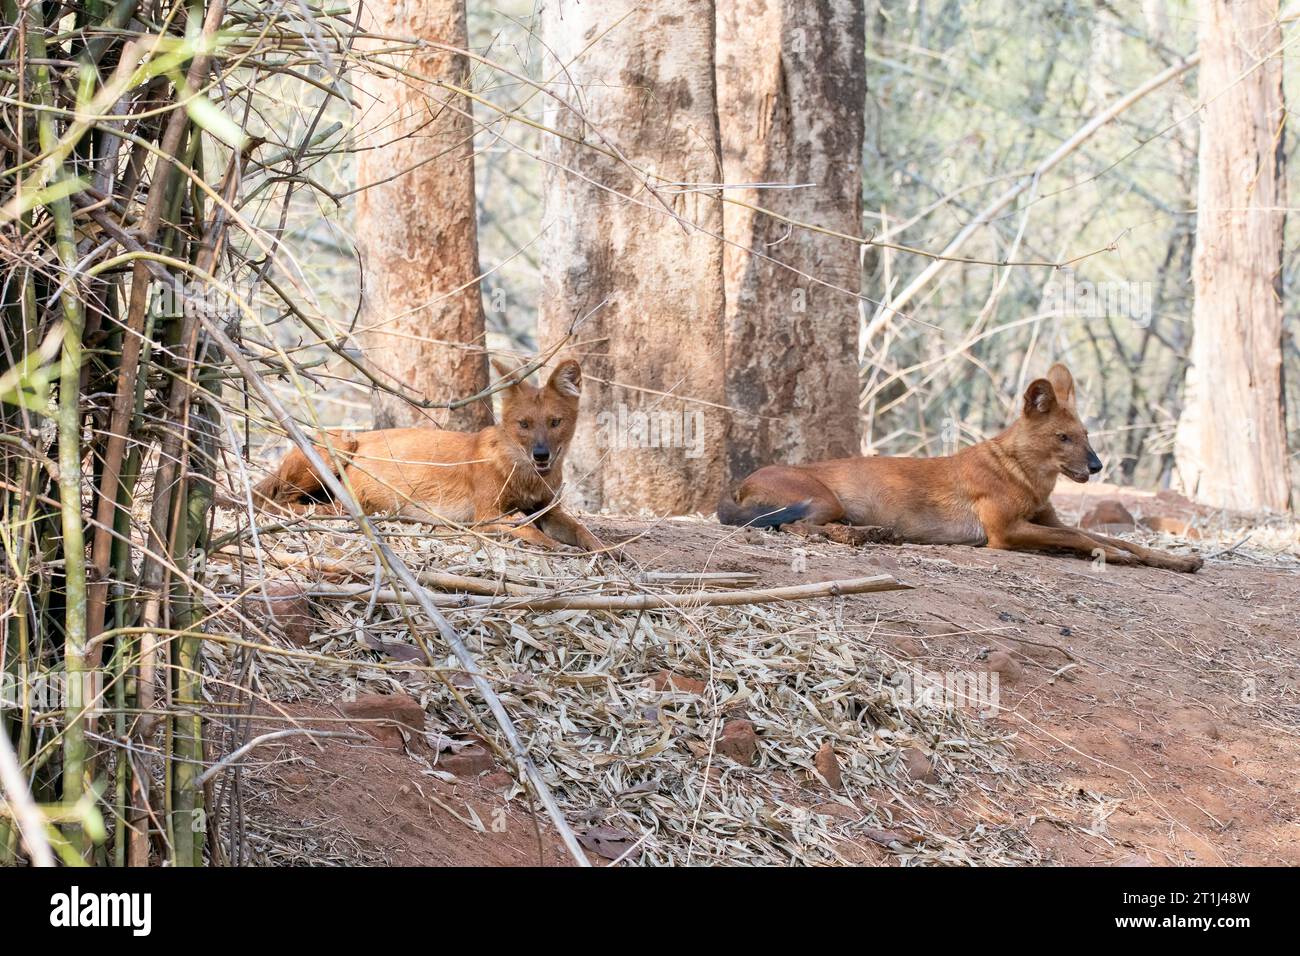 An indian wild dog aka Indian Dhole relaxing next to its kill inside Pench tiger reserve during a wildlife safari Stock Photo